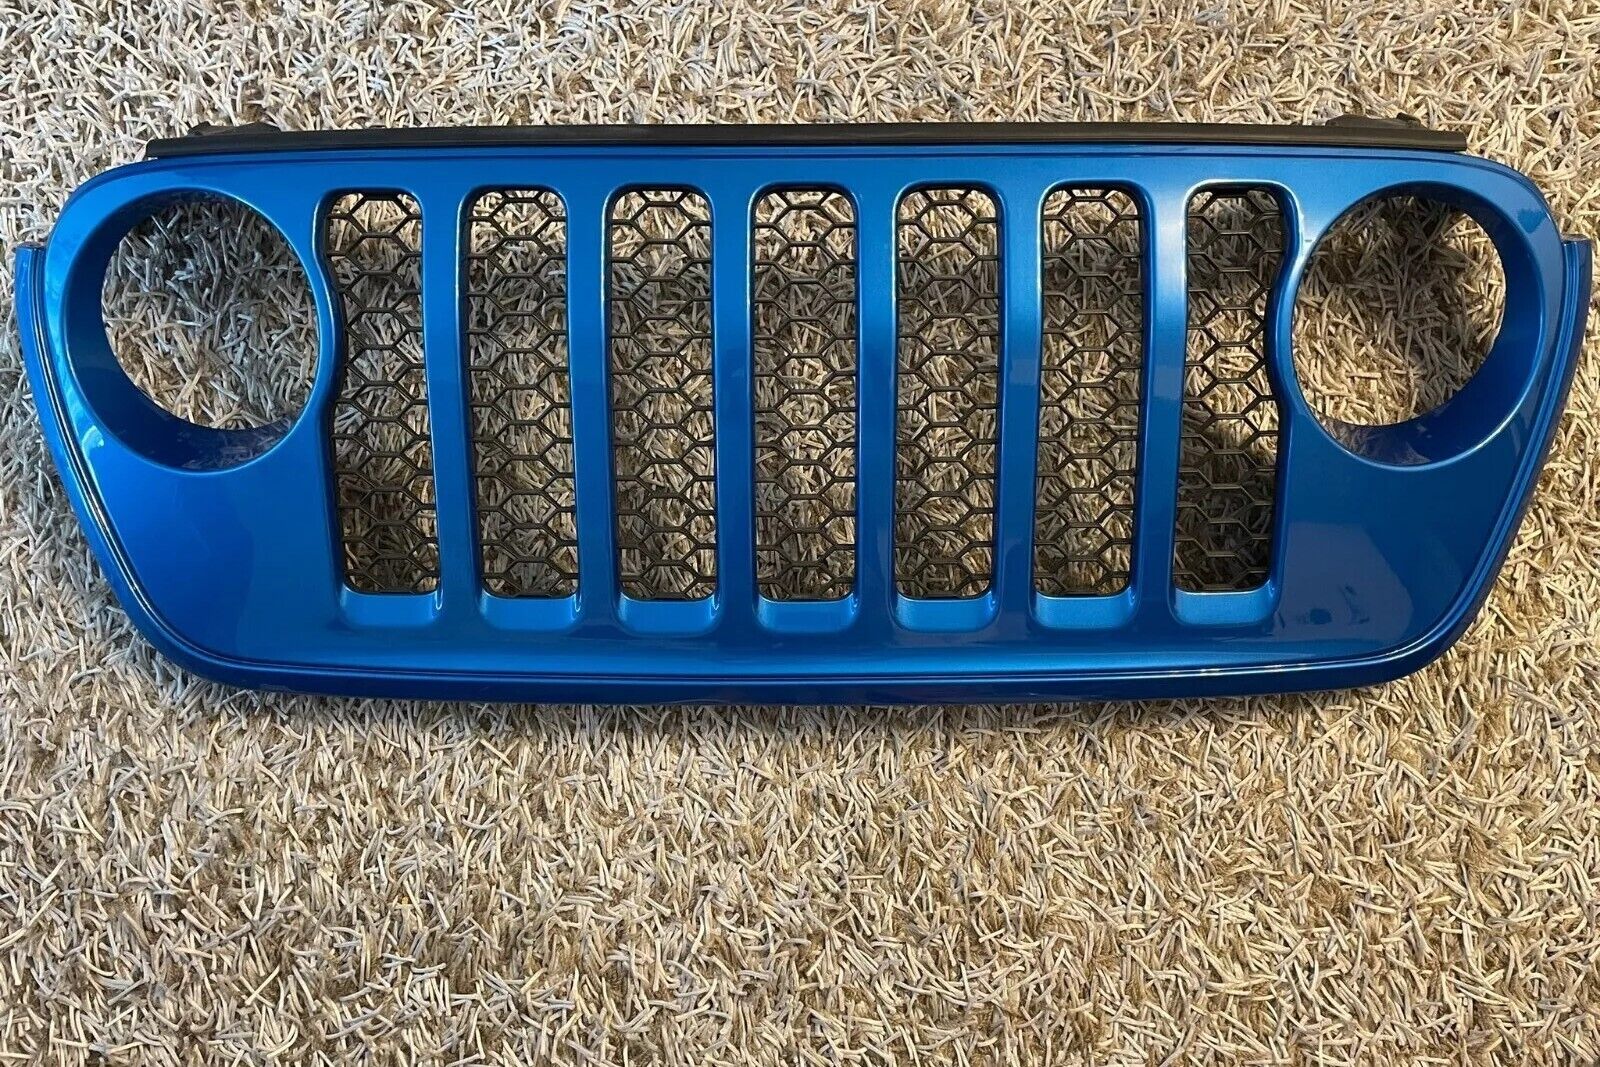 JEEP GLADIATOR WRANGLER  FRONT GRILLE 2018-2022 Silver Zenith Like New 2023